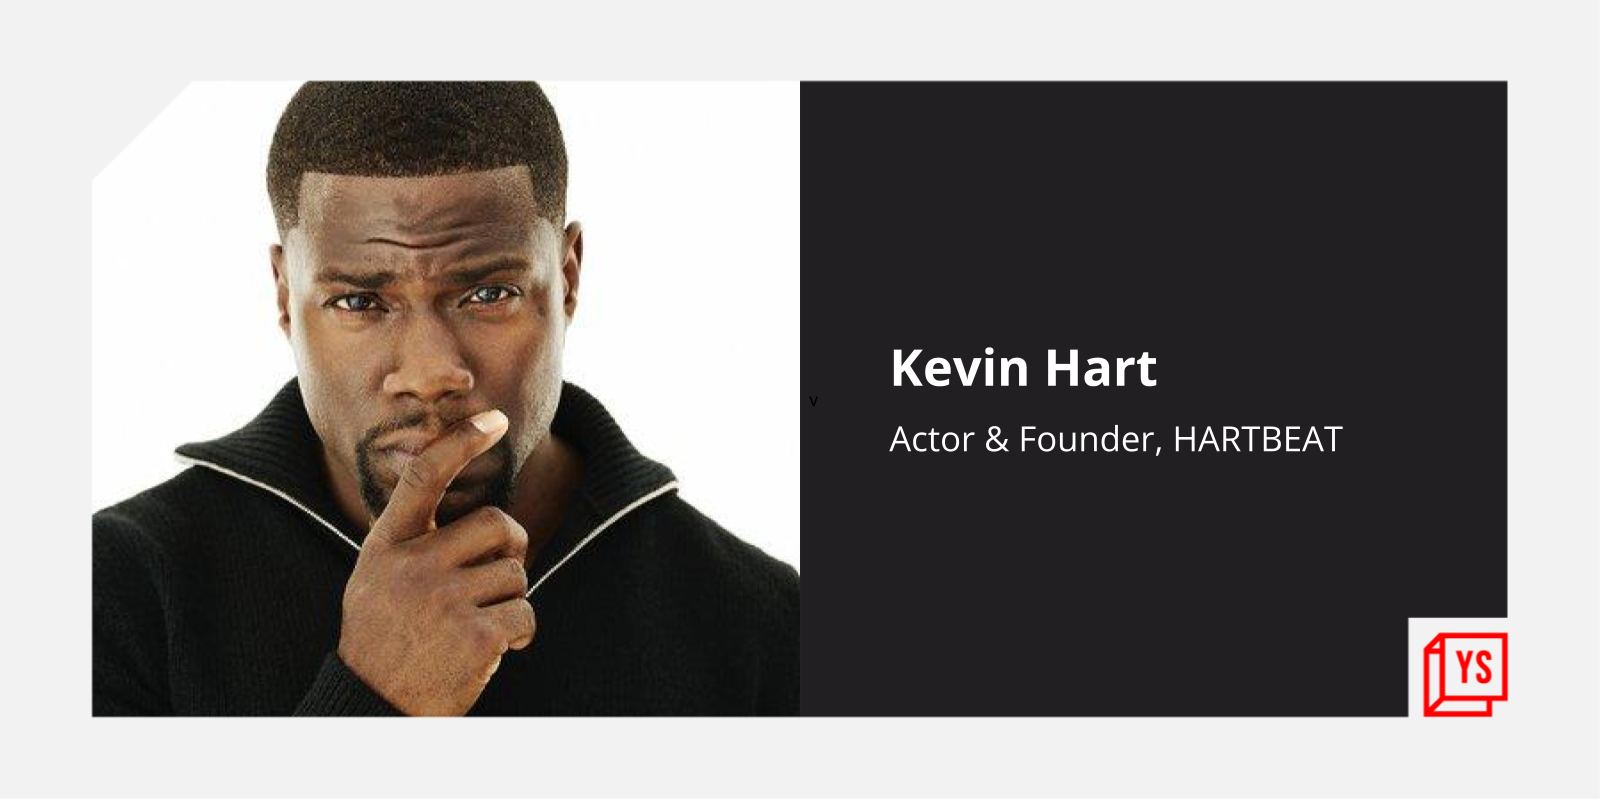 Hollywood actor Kevin Hart launches new media company, raises $100M